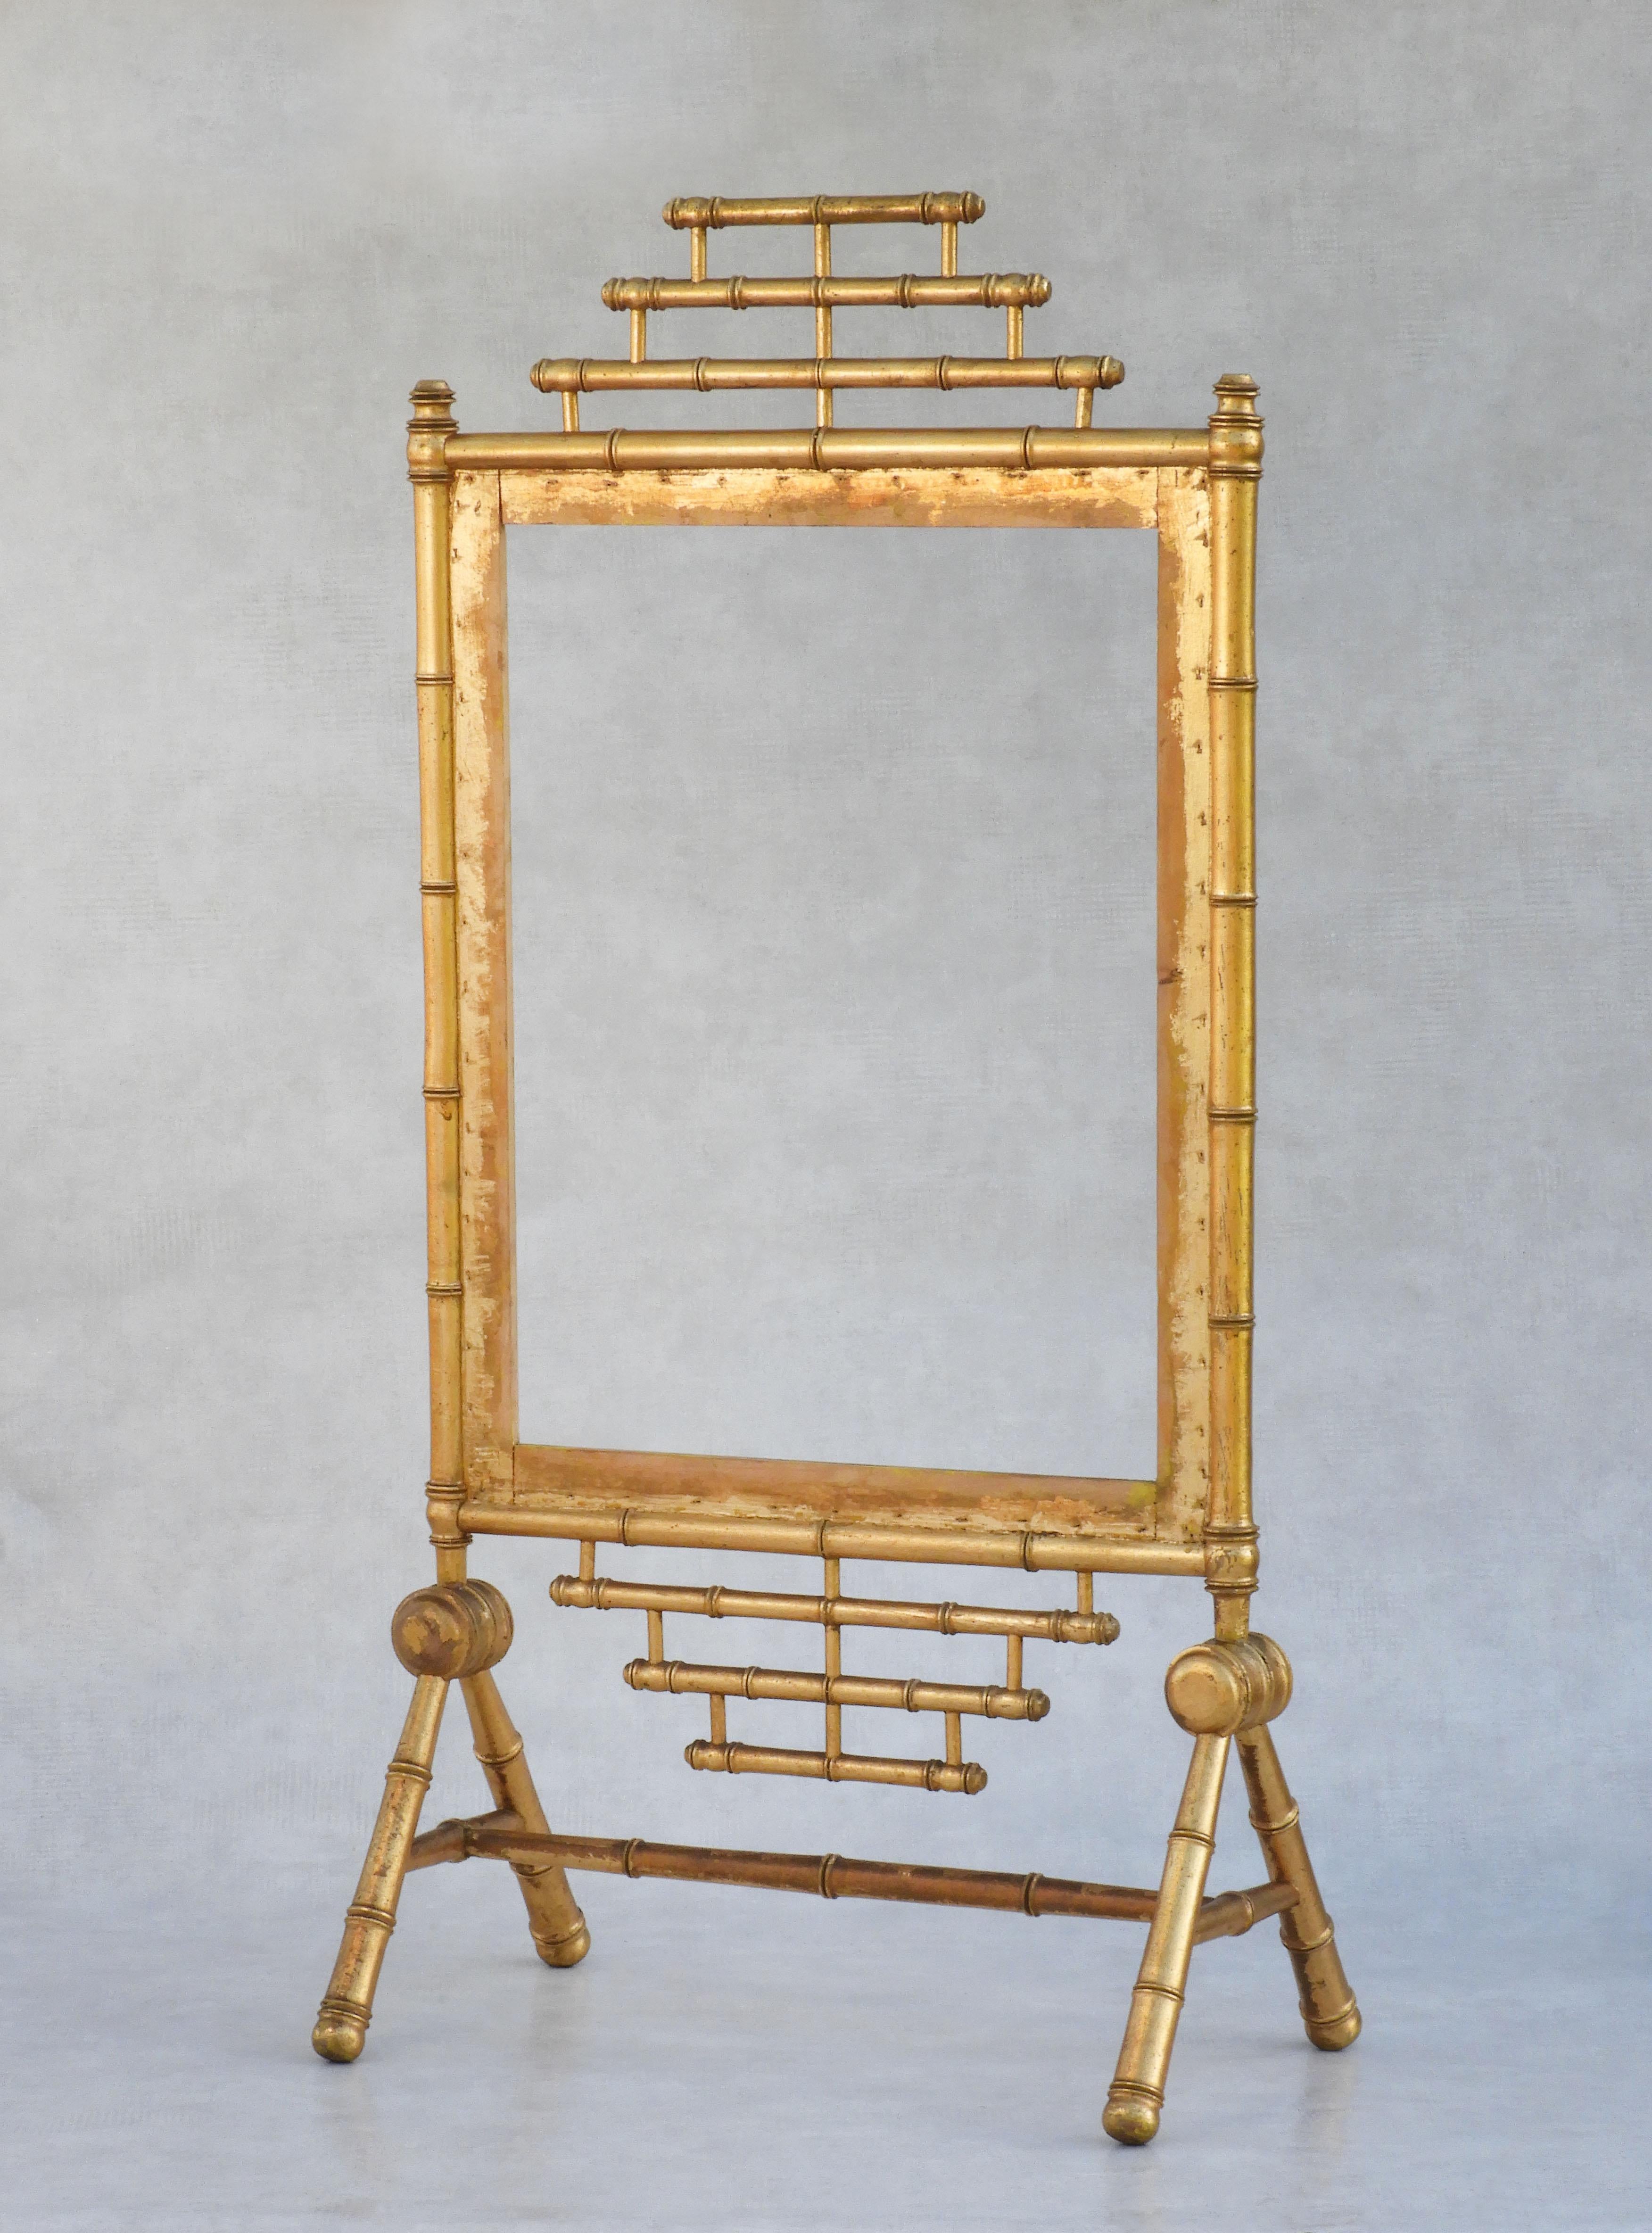 Charming faux bamboo giltwood fire screen frame C1900 France. Great decorative piece, nicely distressed with good patina. Ready to upholster to suit your interior - please ask for details.

Dimensions: 
H 102cm W 52.5cm D 31cm center panel H 57cm